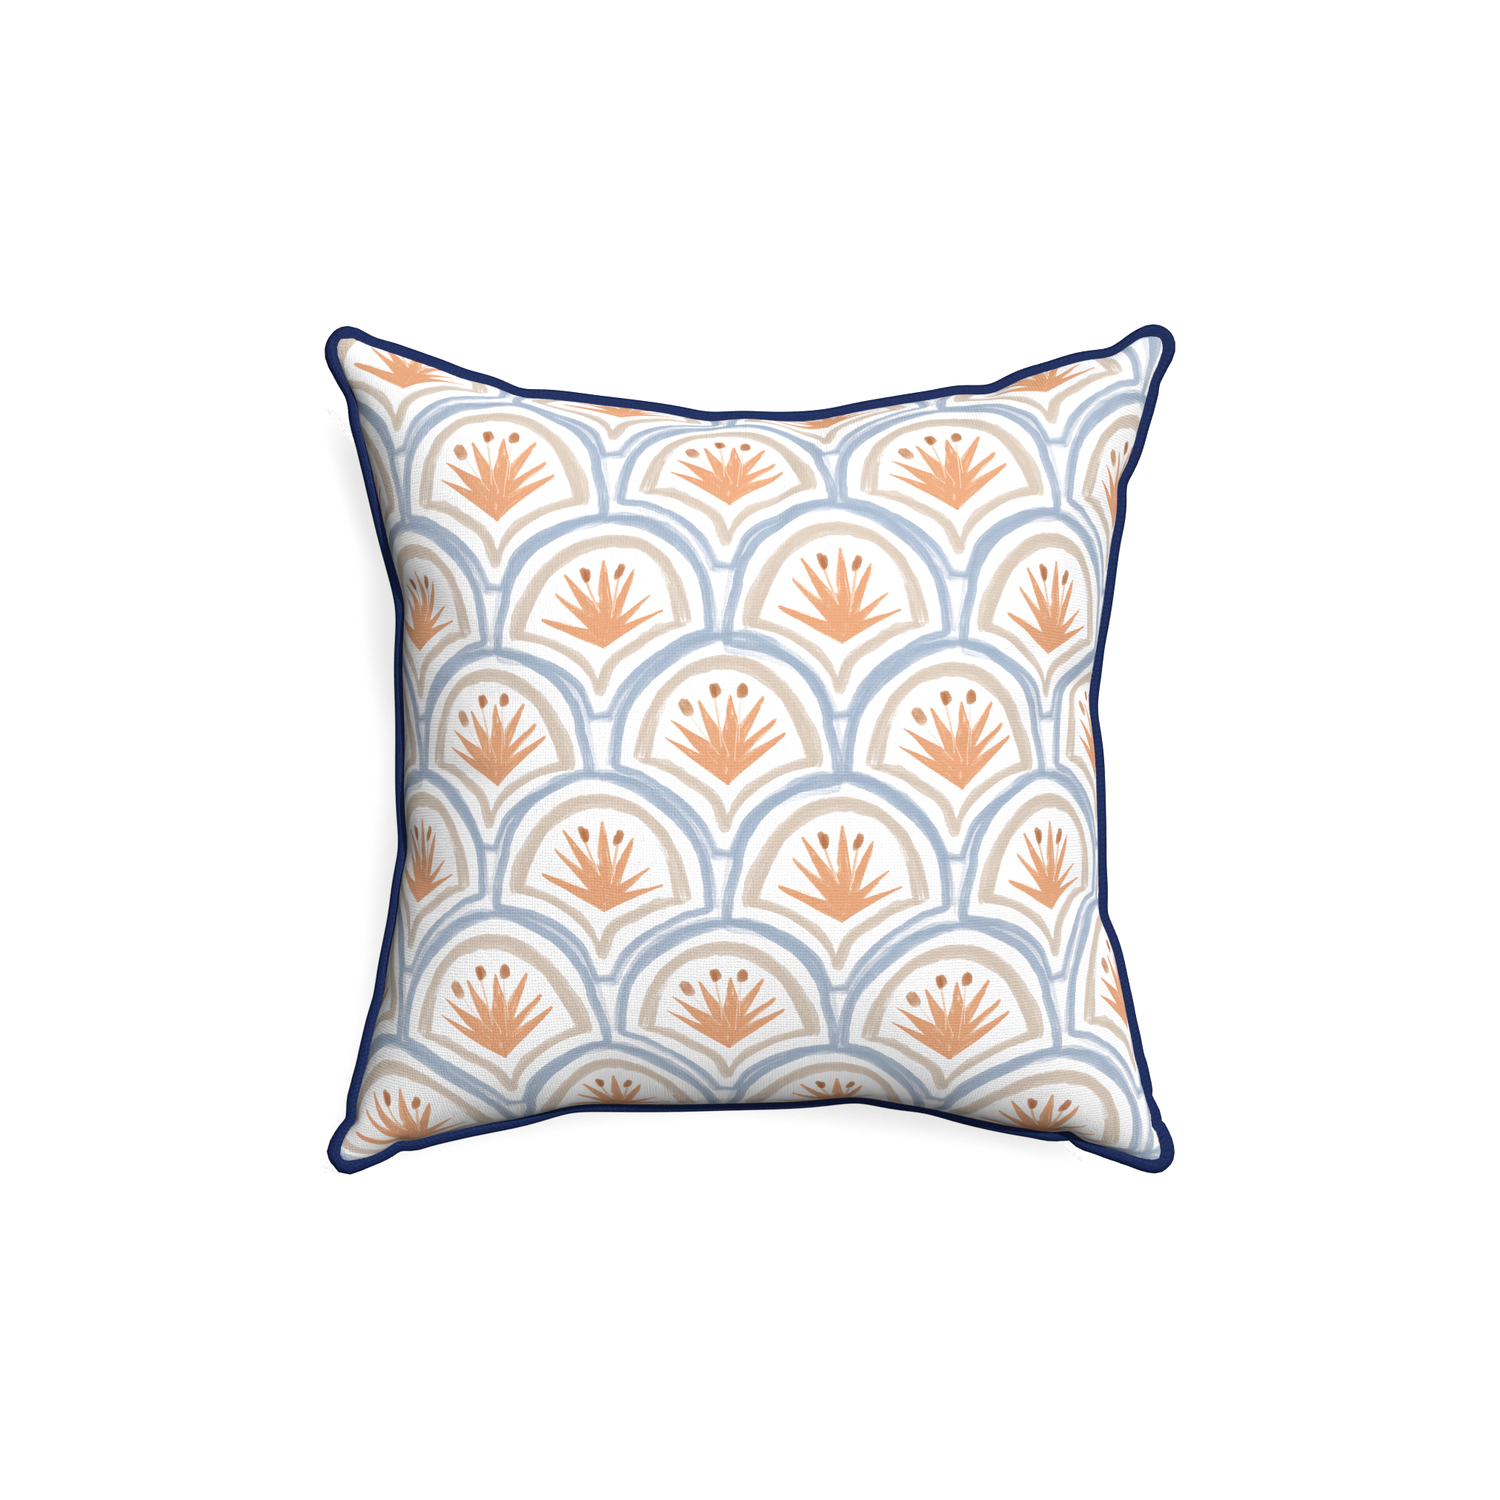 18-square thatcher apricot custom art deco palm patternpillow with midnight piping on white background